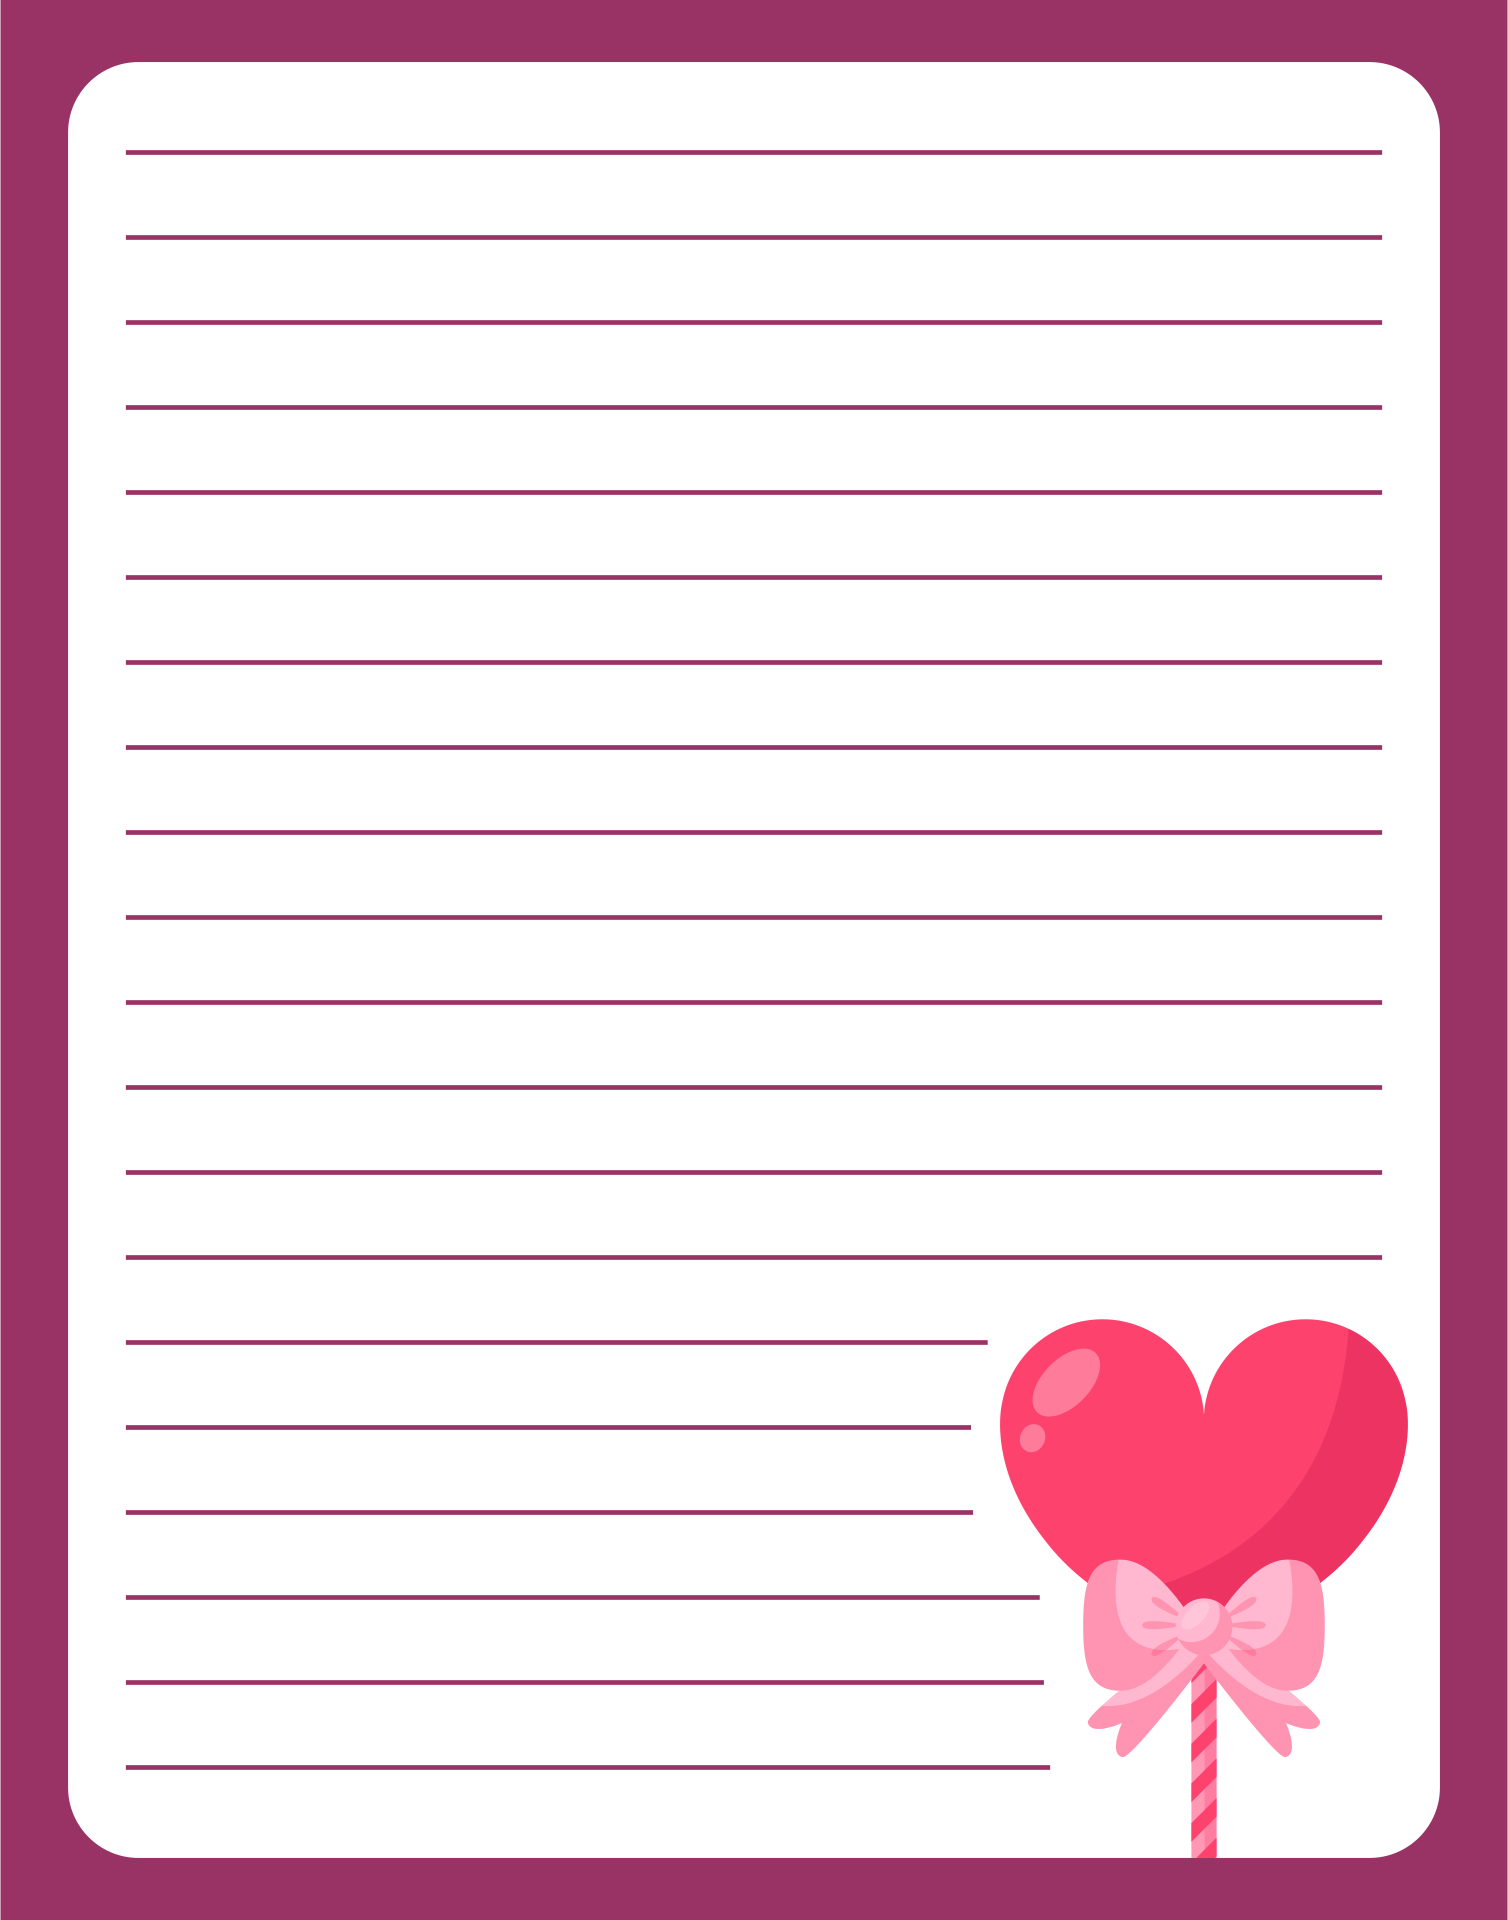 8-best-images-of-cute-owls-love-letter-stationery-printable-free-printable-letter-writing